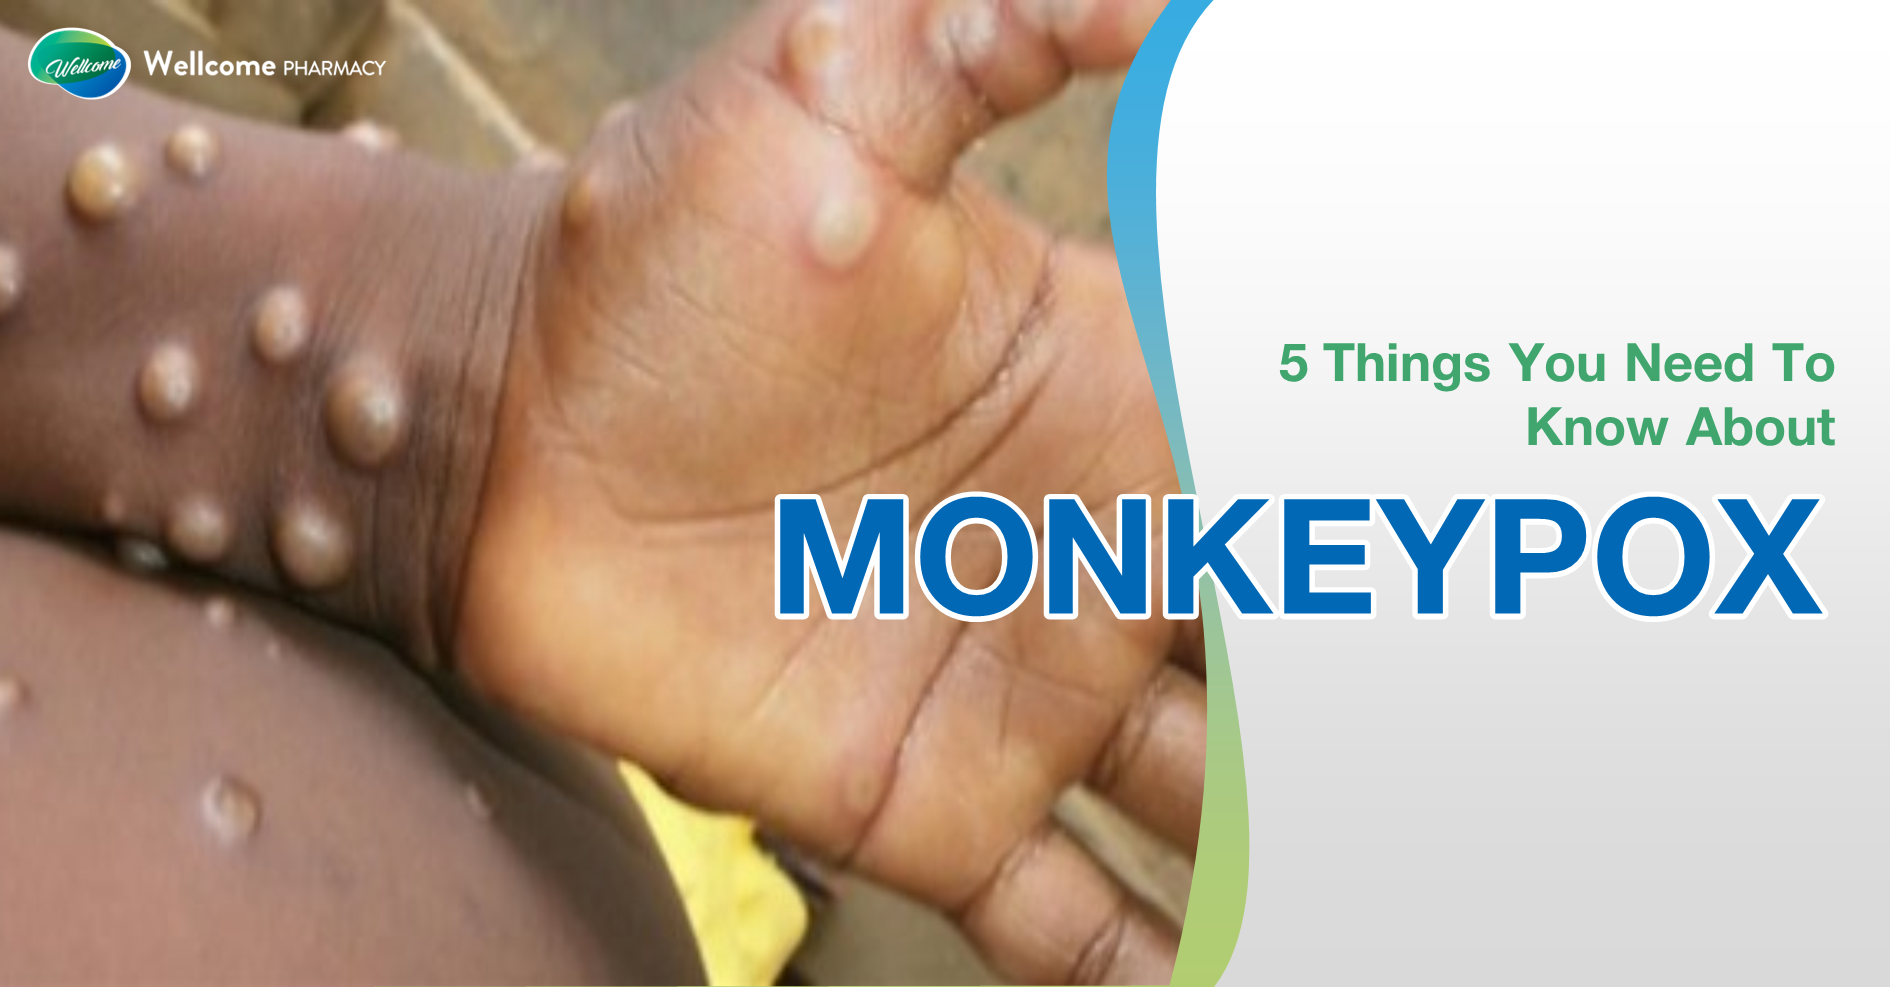 5 Things You Need To Know About Monkeypox